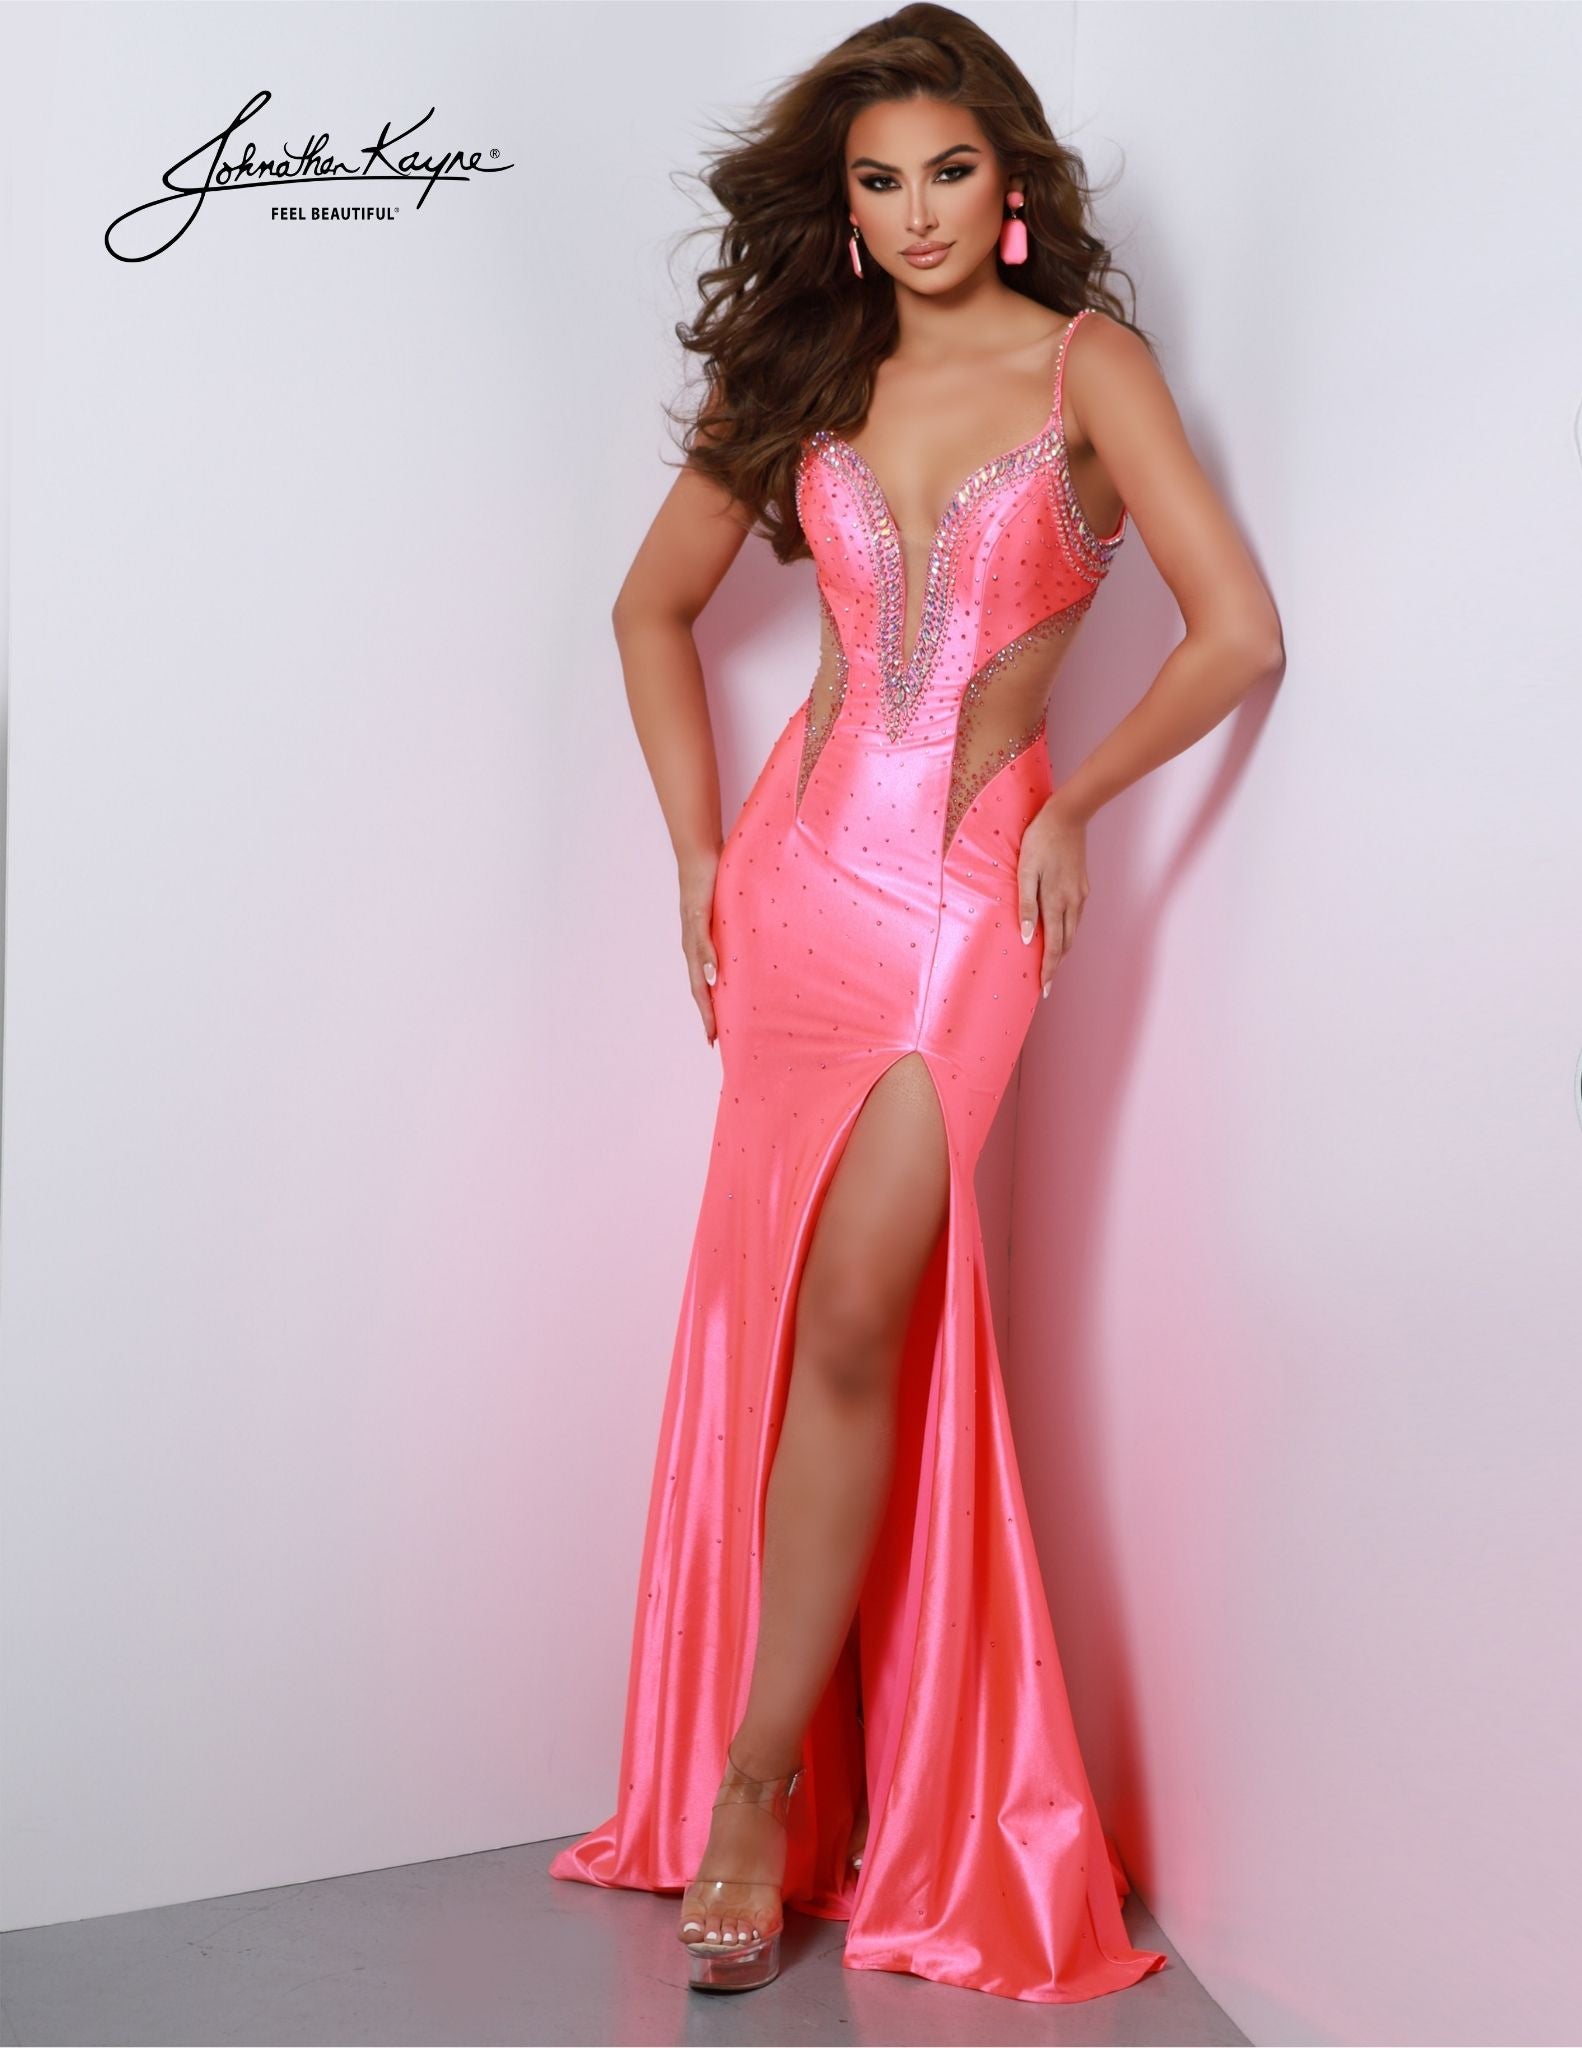 Experience the sophistication of Johnathan Kayne 2882 Prom Dress. The stunning fitted dress features a low V-neckline and crystals, with a train and slit for a sleek silhouette. Perfect for formal events, pageants, and more. Dare to stun and make a statement with our shiny 4-Way Lycra dress. Featuring edgy side cutouts, a low V-neckline, and a dramatic slit, this dress is your invitation to stop traffic with your unique and captivating style.